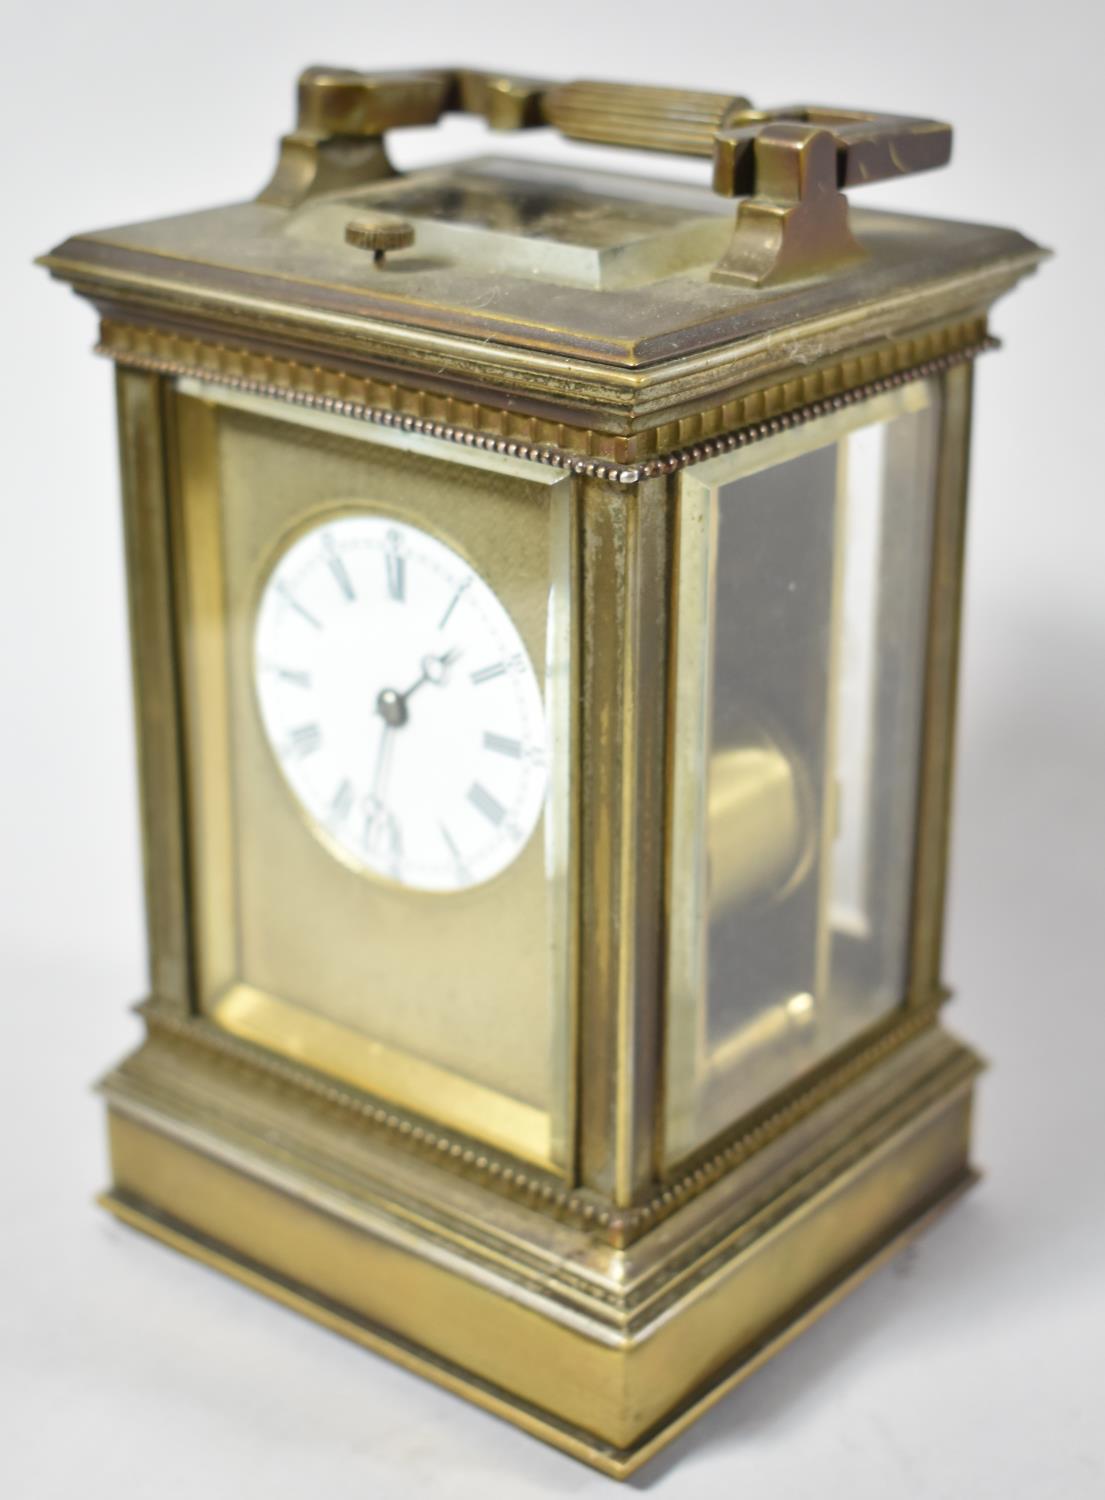 A Late 19th Century French Brass Carriage Clock with Repeater Movement, Repeater Button Working